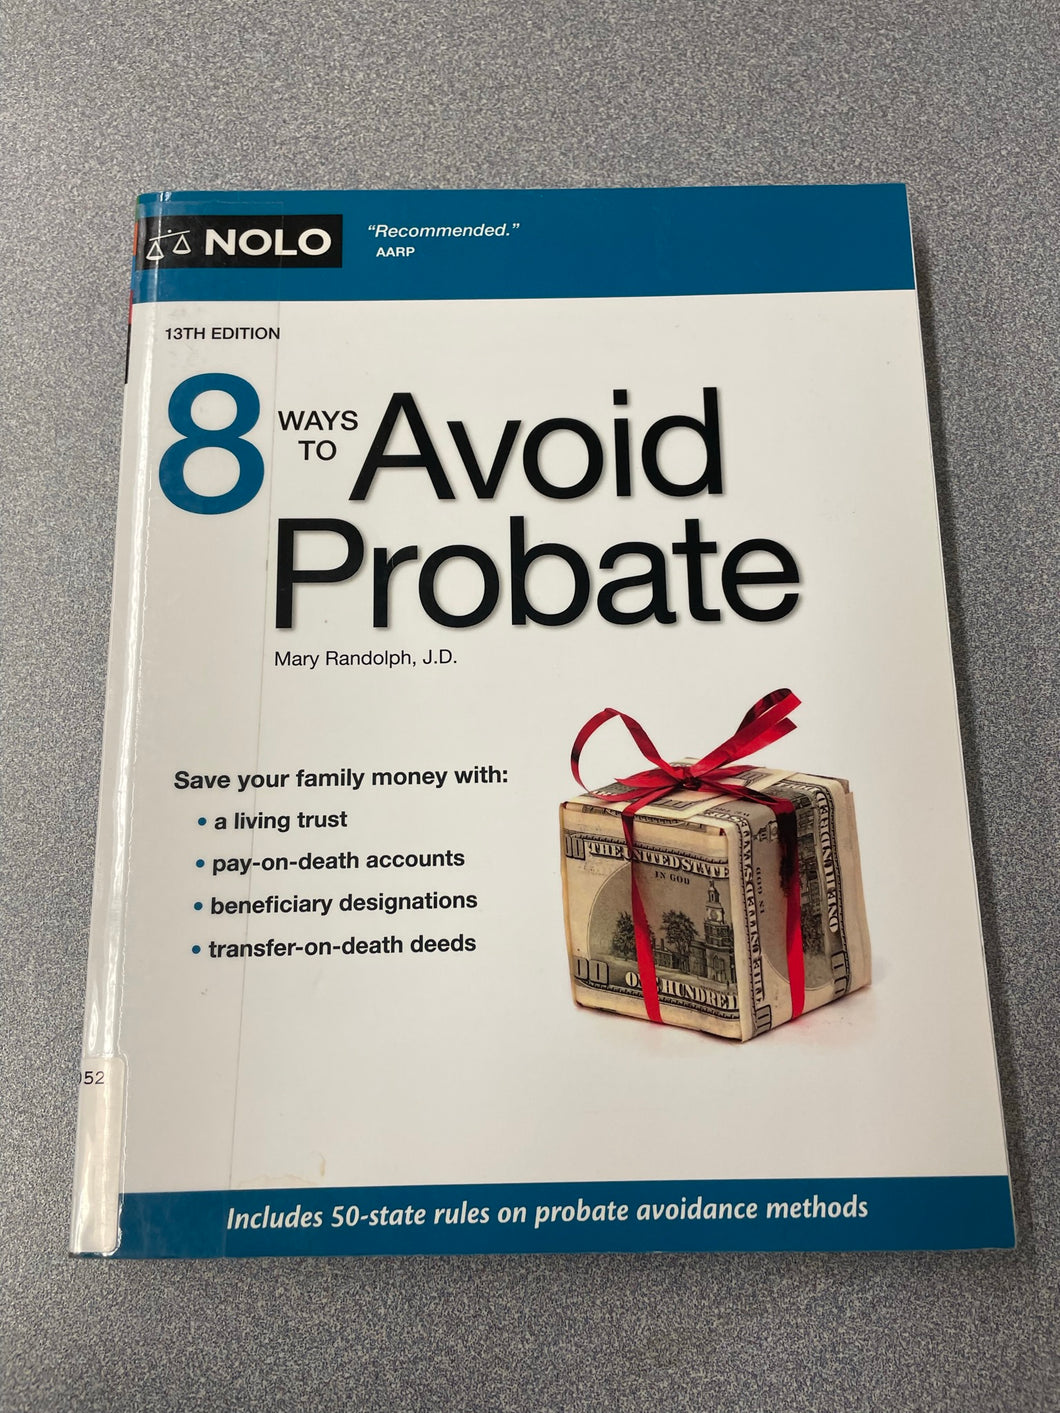 8 Ways to Avoid Probate, 13th Edition, Randolph, Mary [2020] LAW 10/22